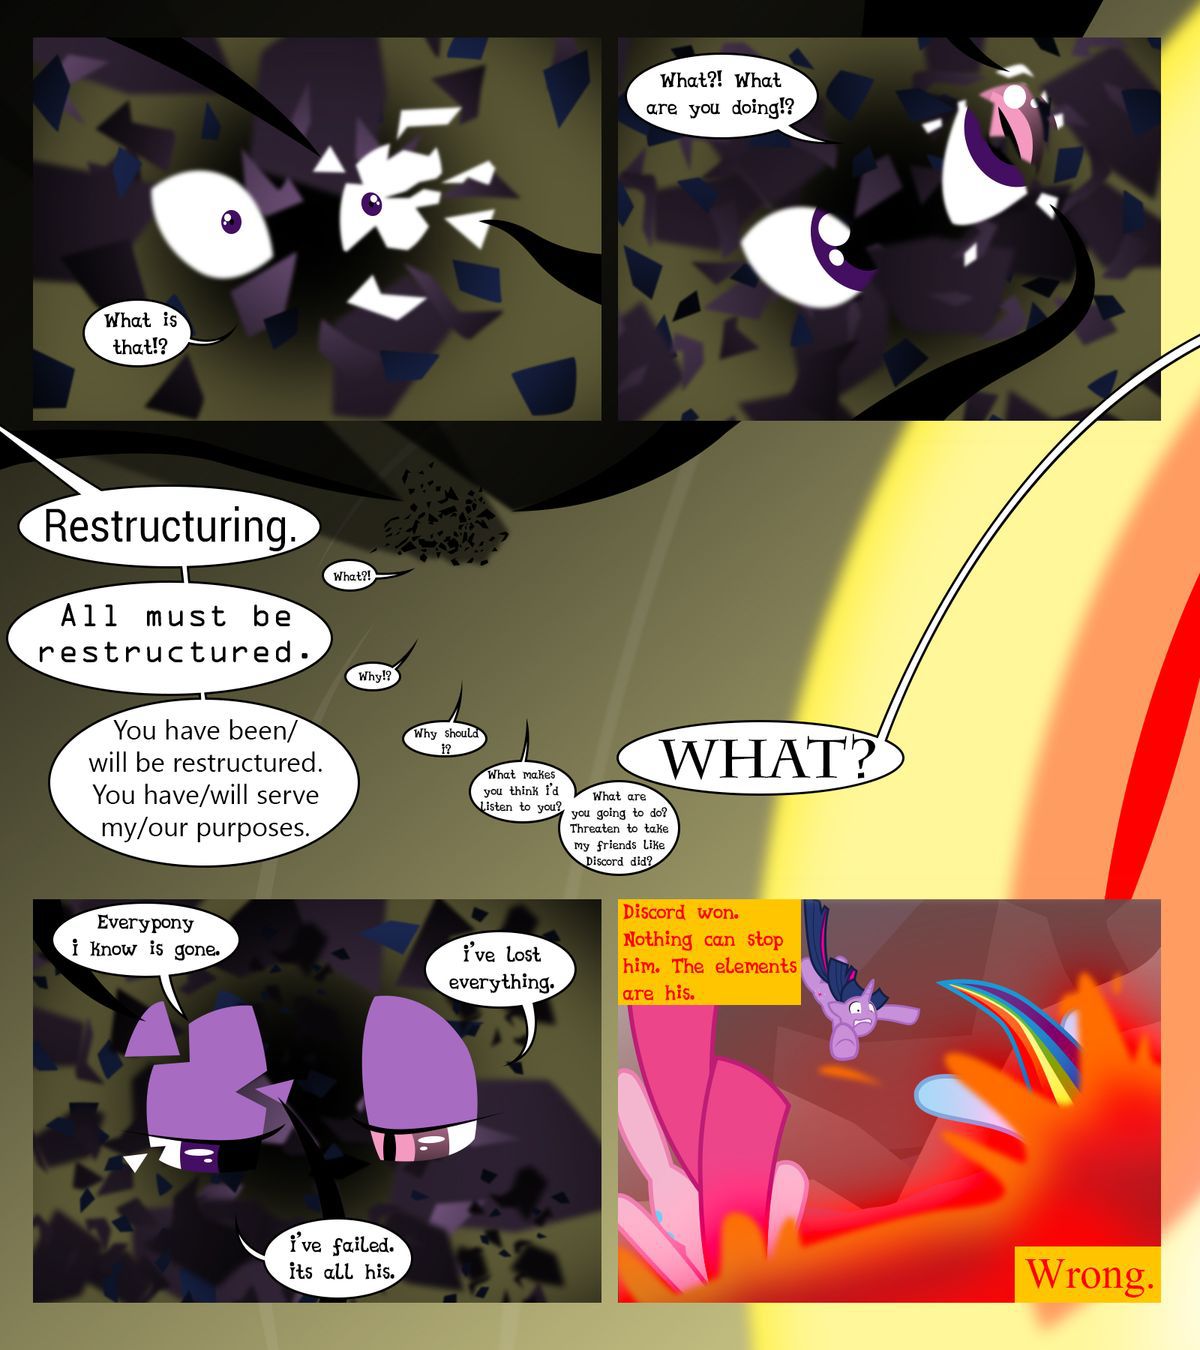 [GatesMcCloud] Cutie Mark Crusaders 10k: Chapter 3 - The Lost (My Little Pony: Friendship is Magic) [English] [Ongoing] 7